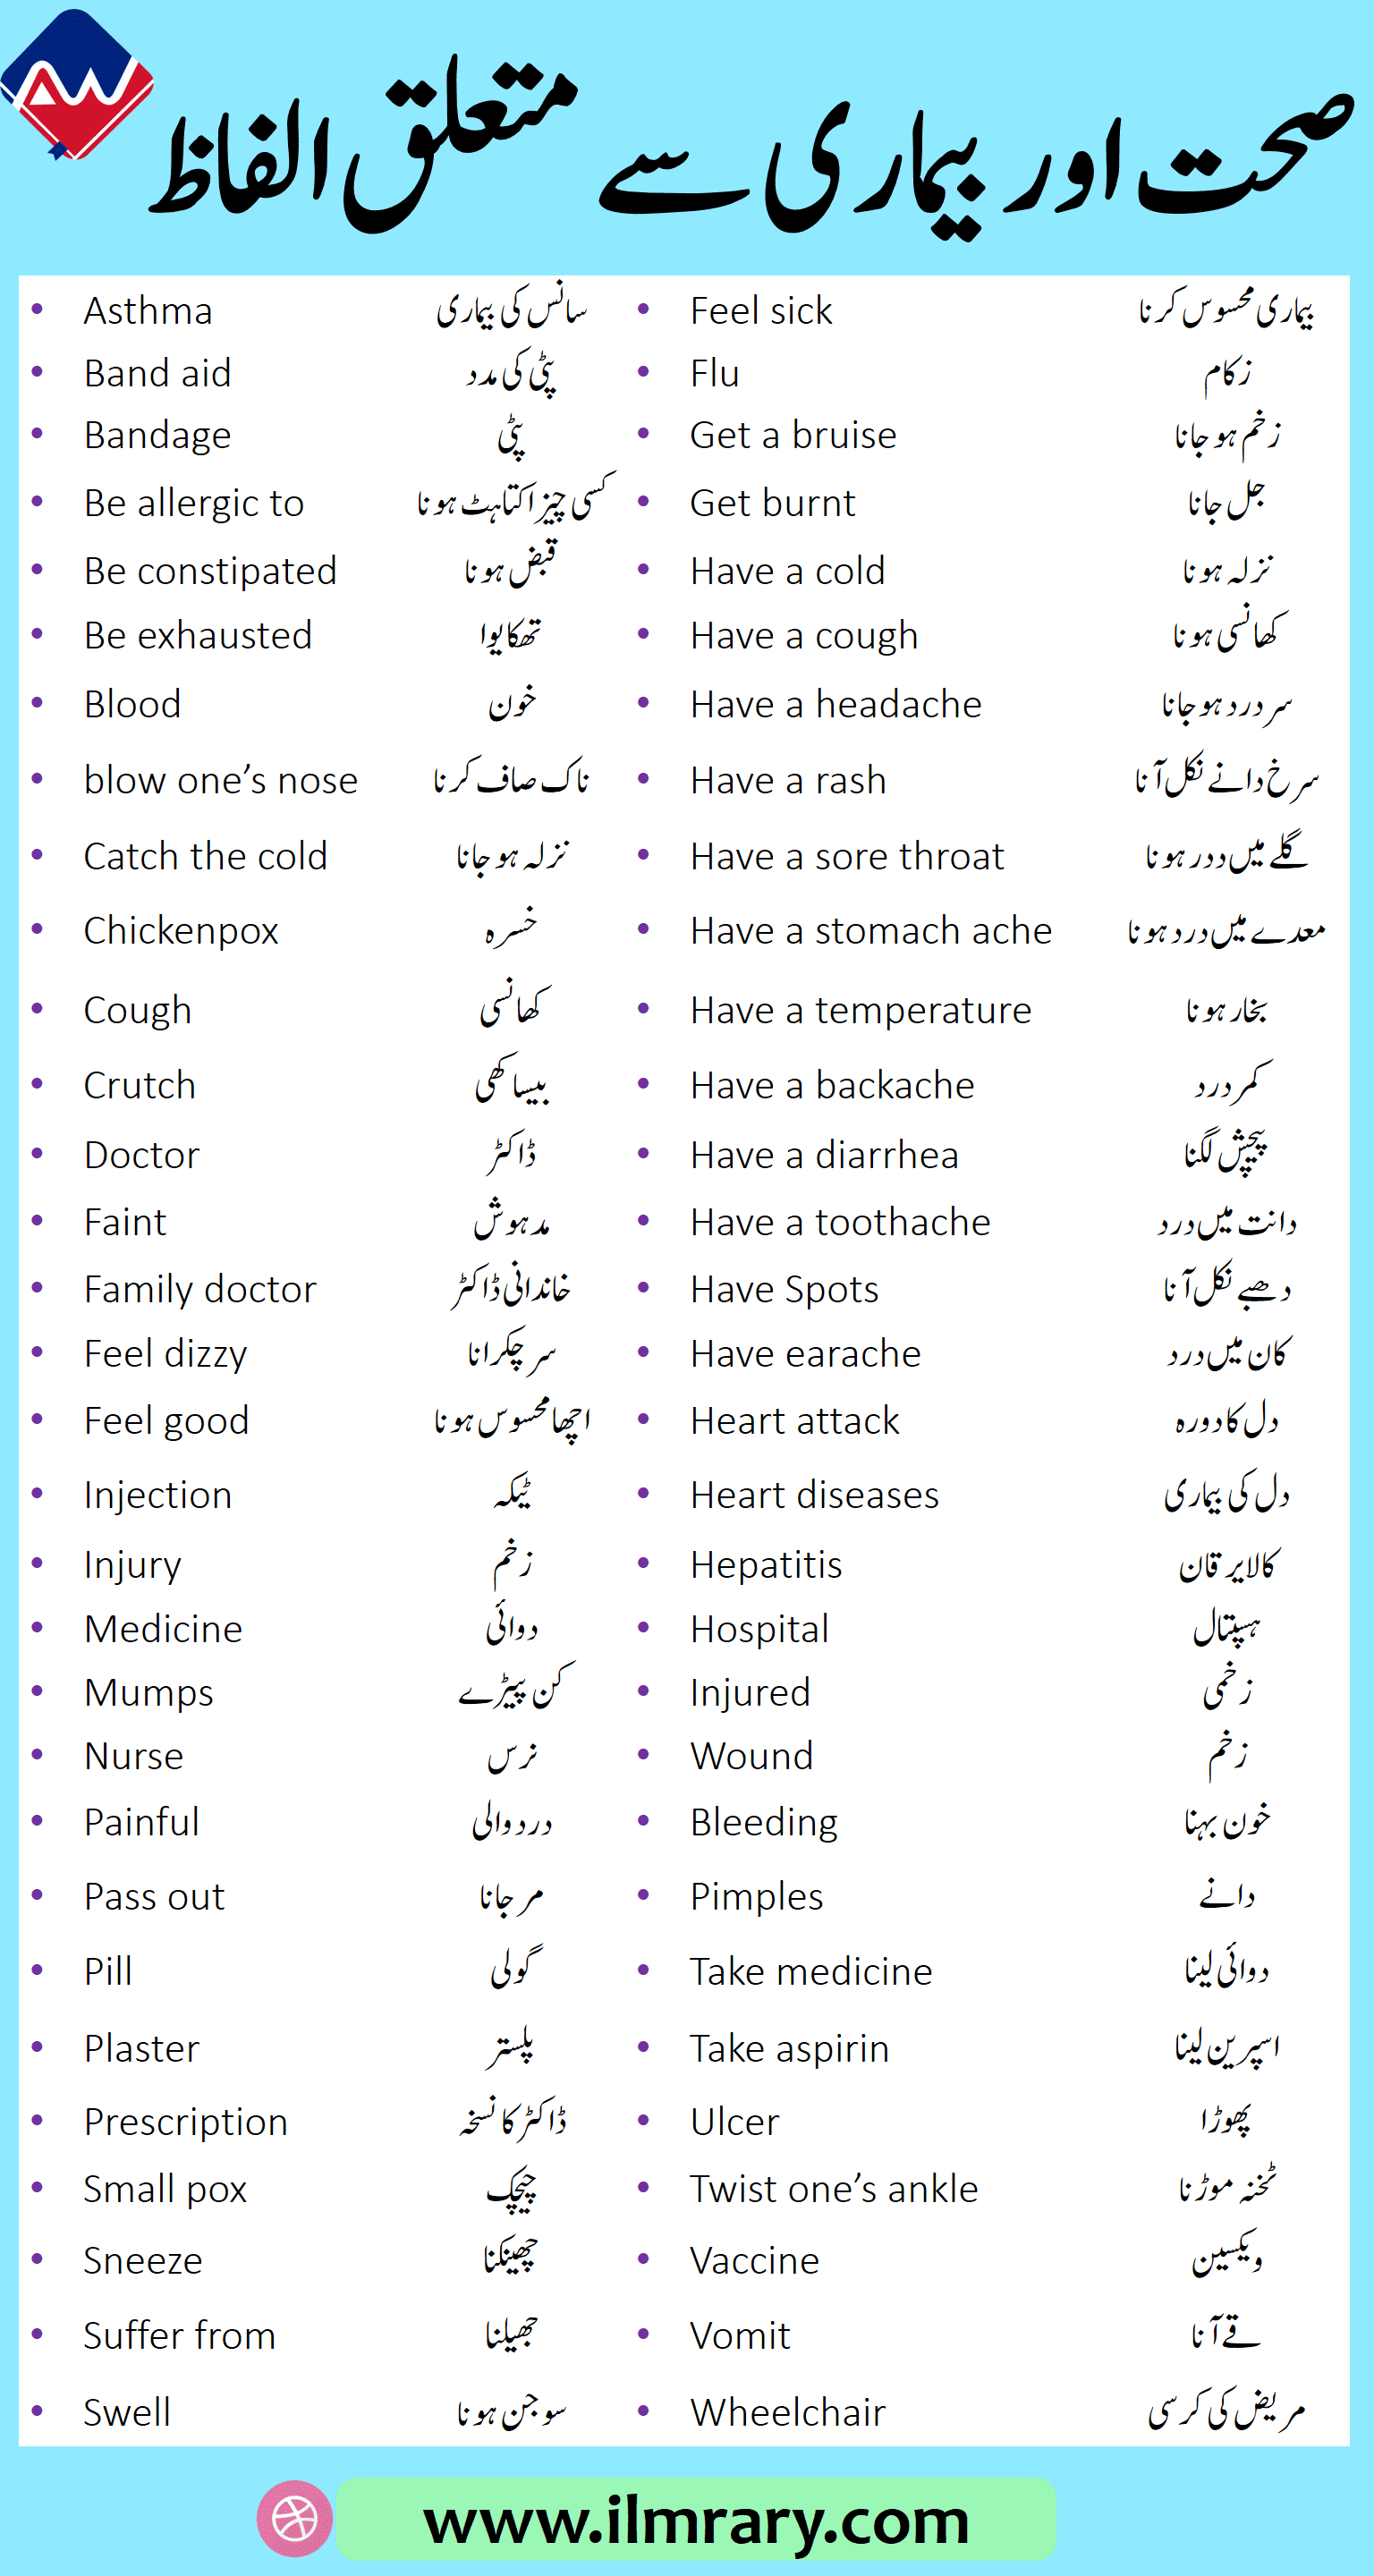 Daily Use English Vocabulary for Health and illness in Urdu